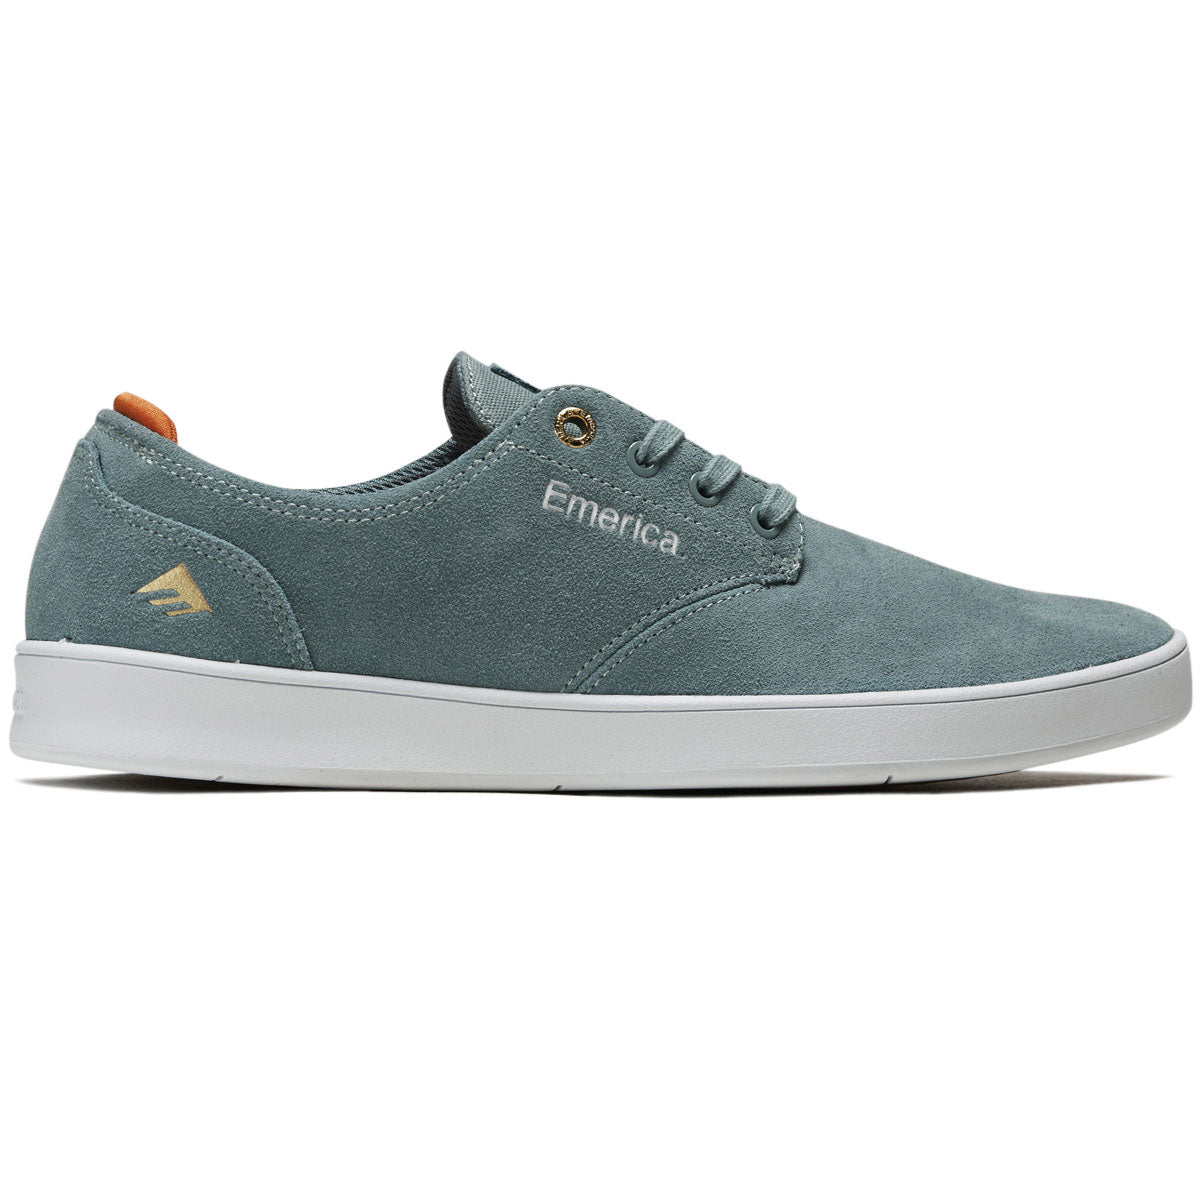 Emerica Romero Laced Shoes - Dusty Blue image 1